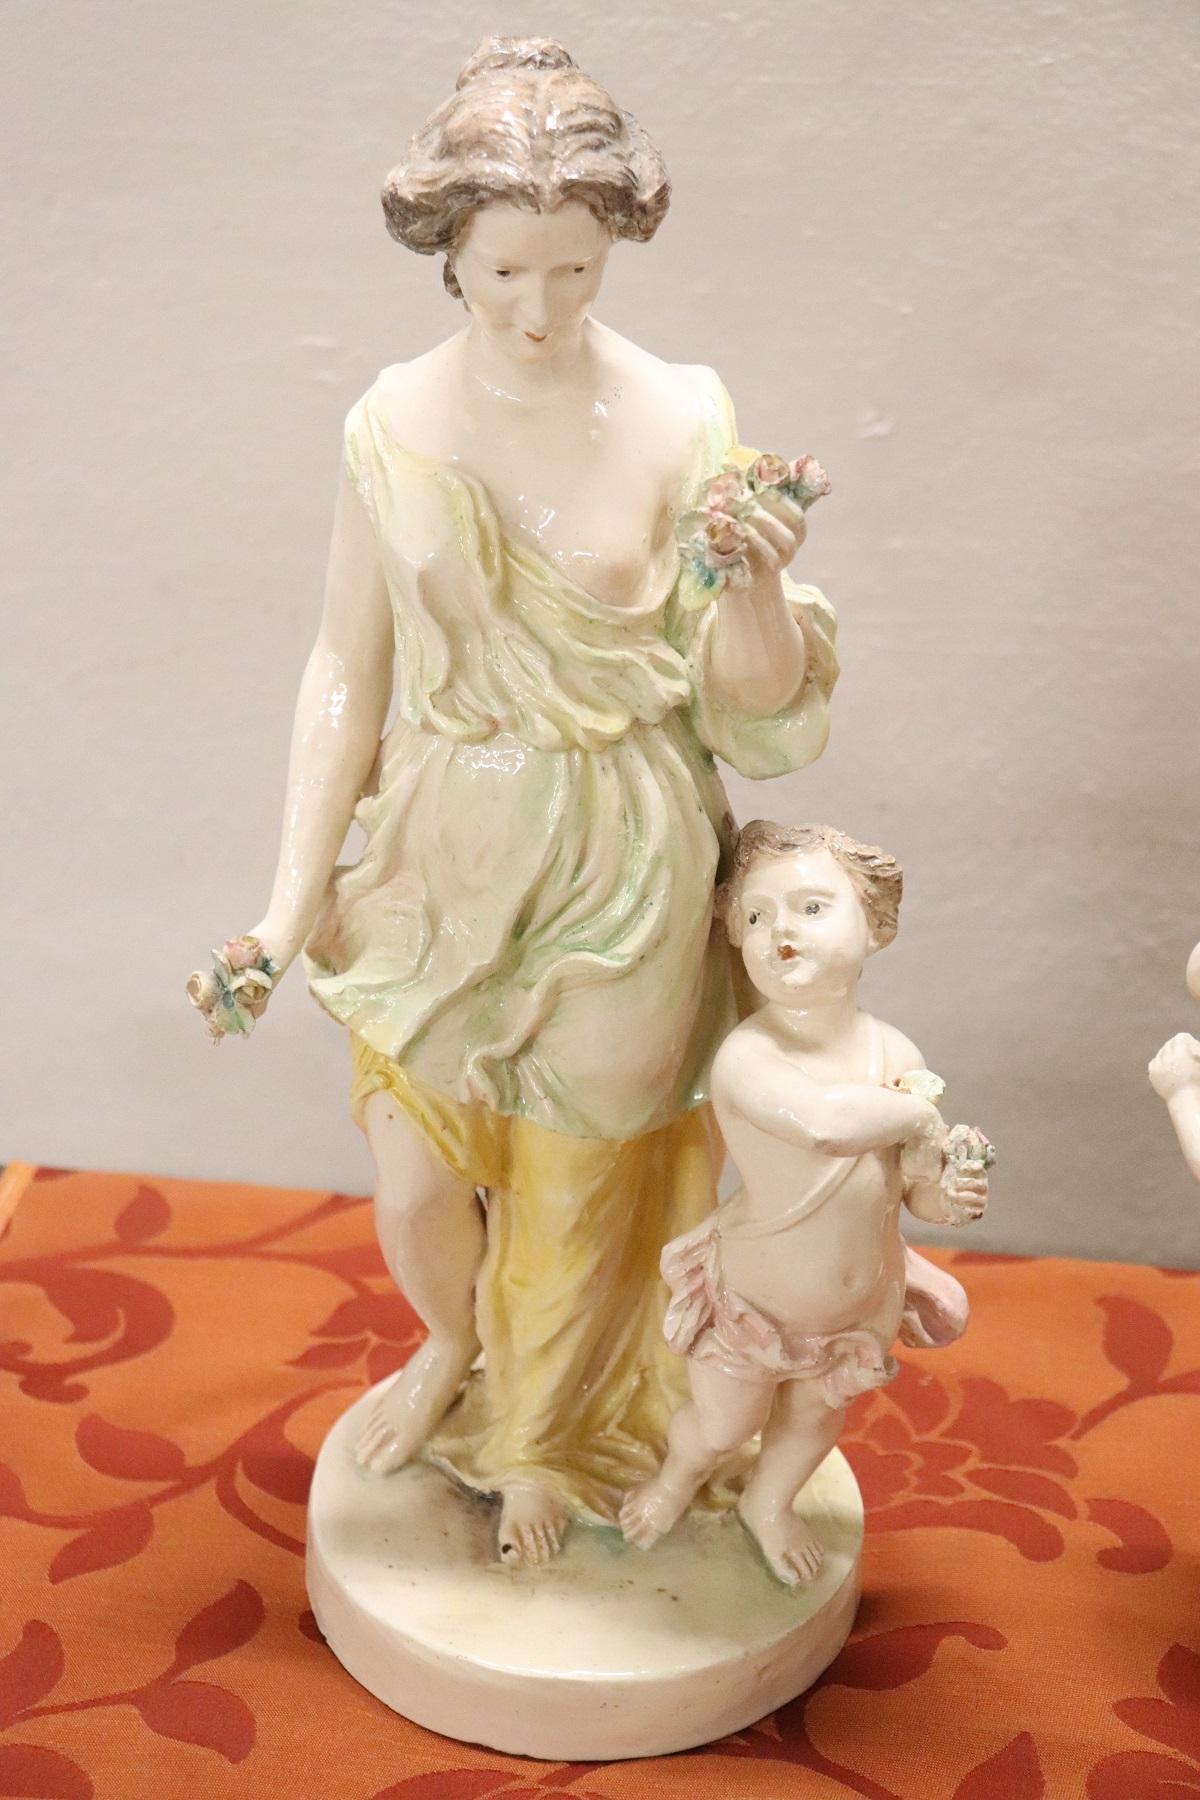 Group of 4 hand painted porcelain sculptures. Famous Italian brand at the Capodimonte base. The four girls represent the Four Seasons.